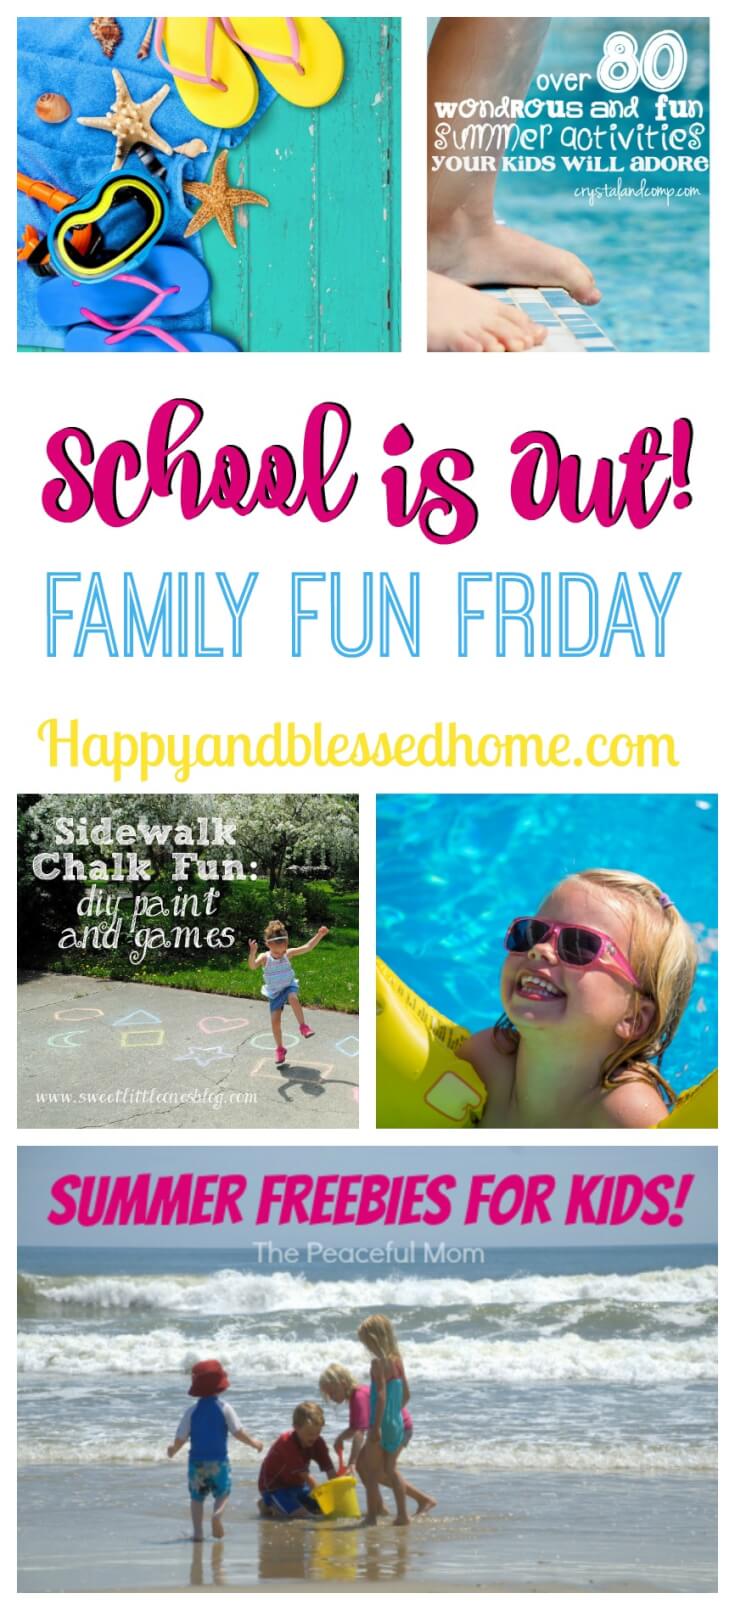 school is out family fun friday